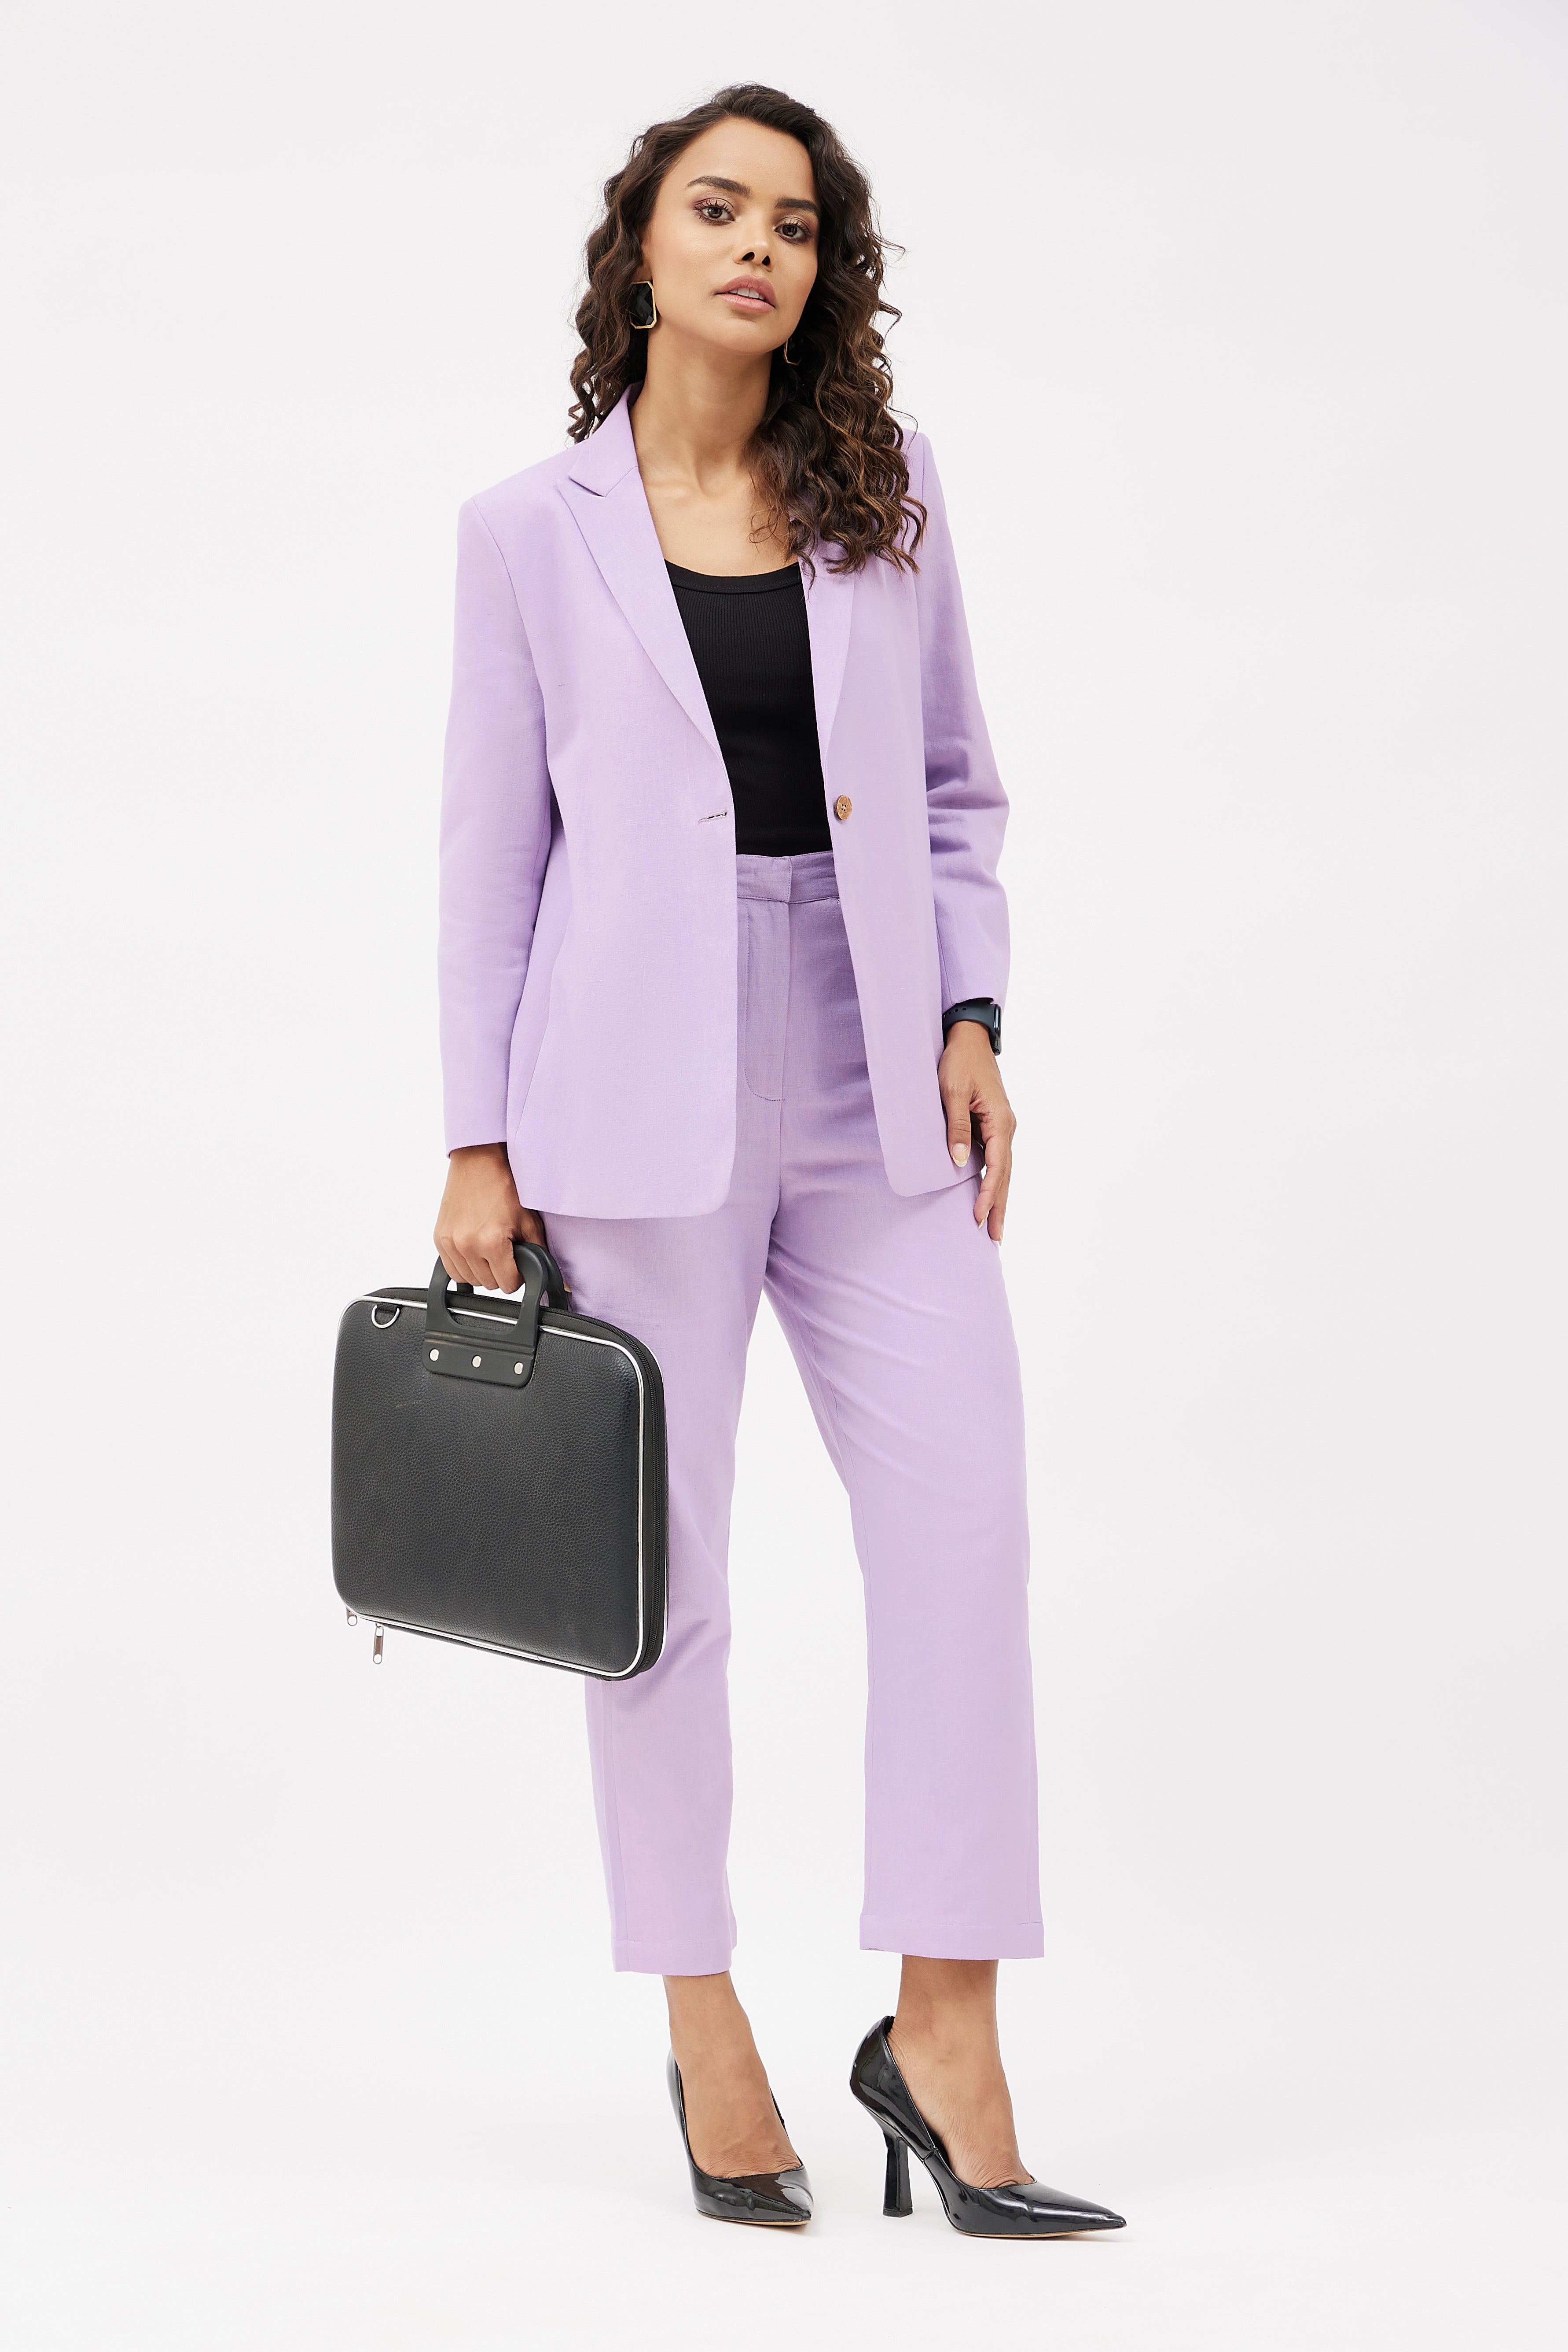 House of Cavani Miami Lilac Slim Fit Suit - Clothing from House Of Cavani UK